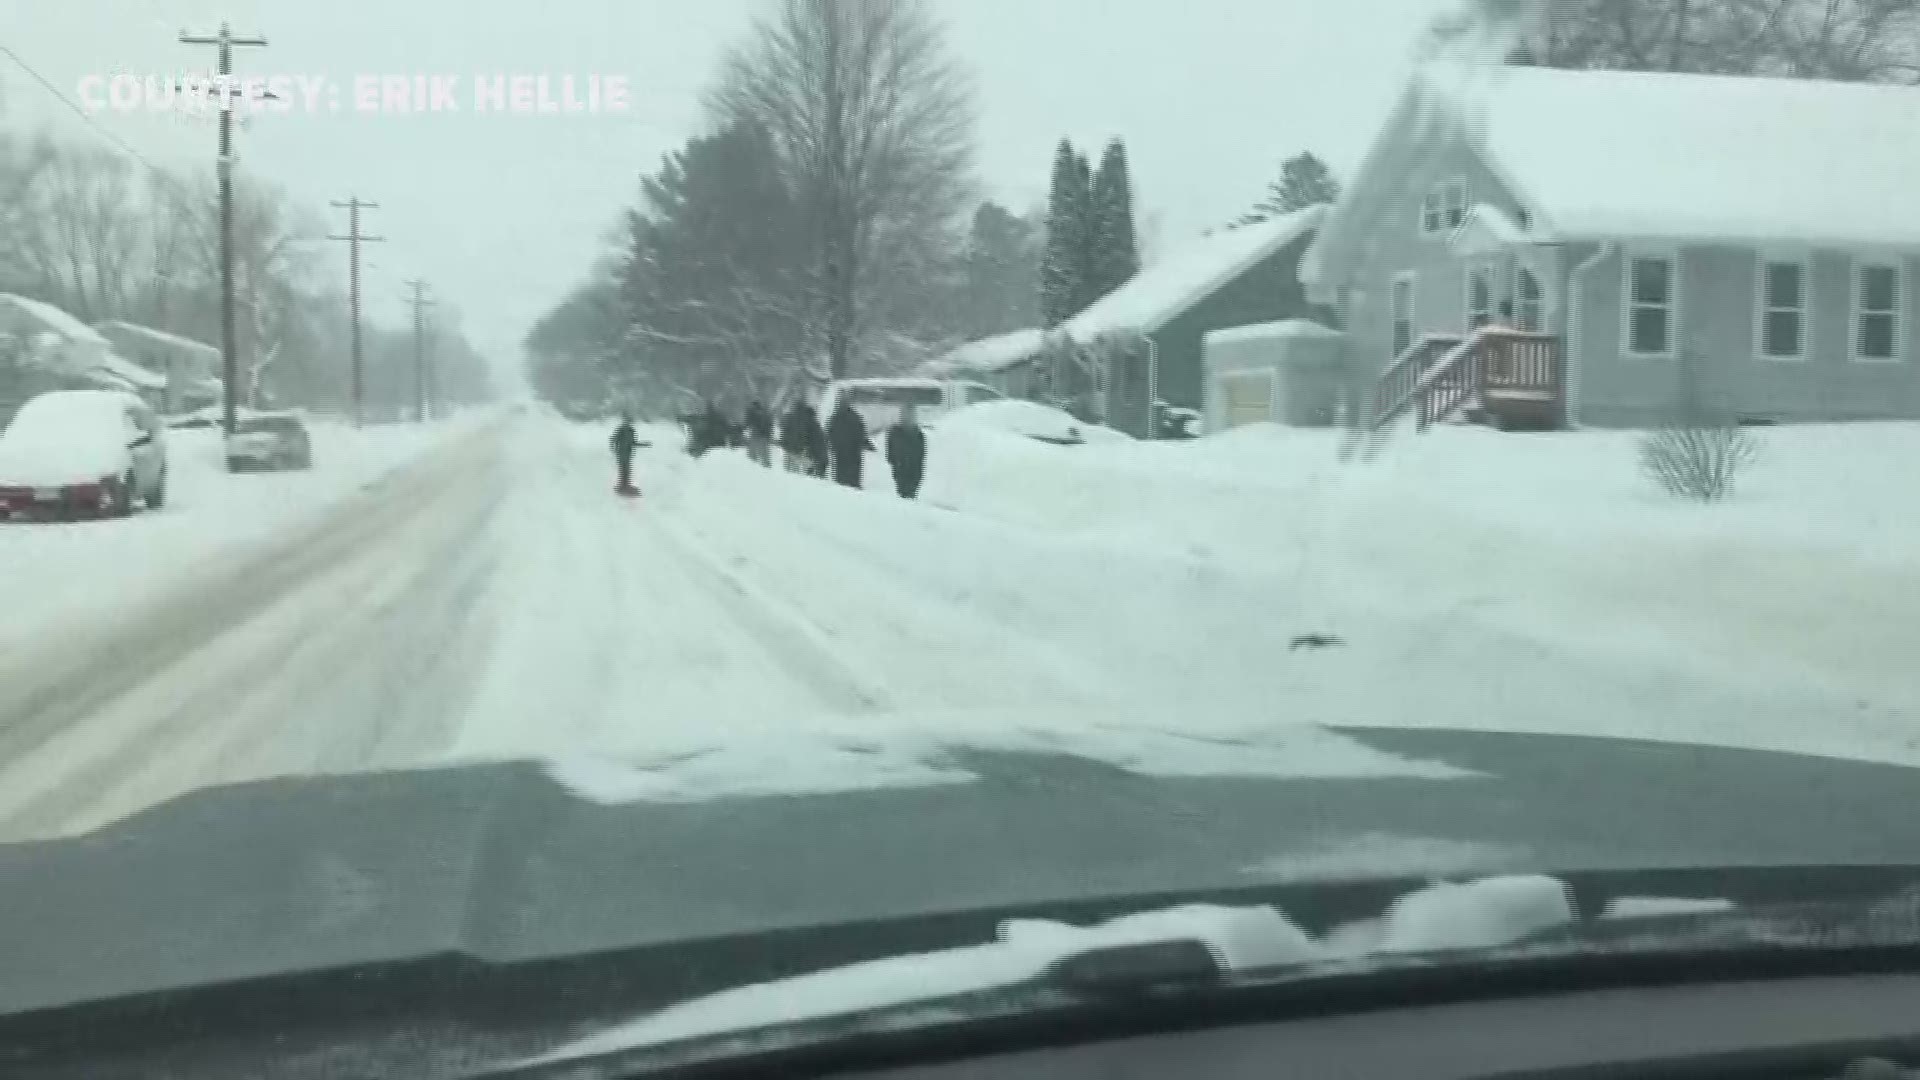 About a dozen 7th and 8th grade hockey players rallied, along with some siblings, and spent the day shoveling out neighbors and businesses in Amery, Wisconsin. https://kare11.tv/2ImDl0v